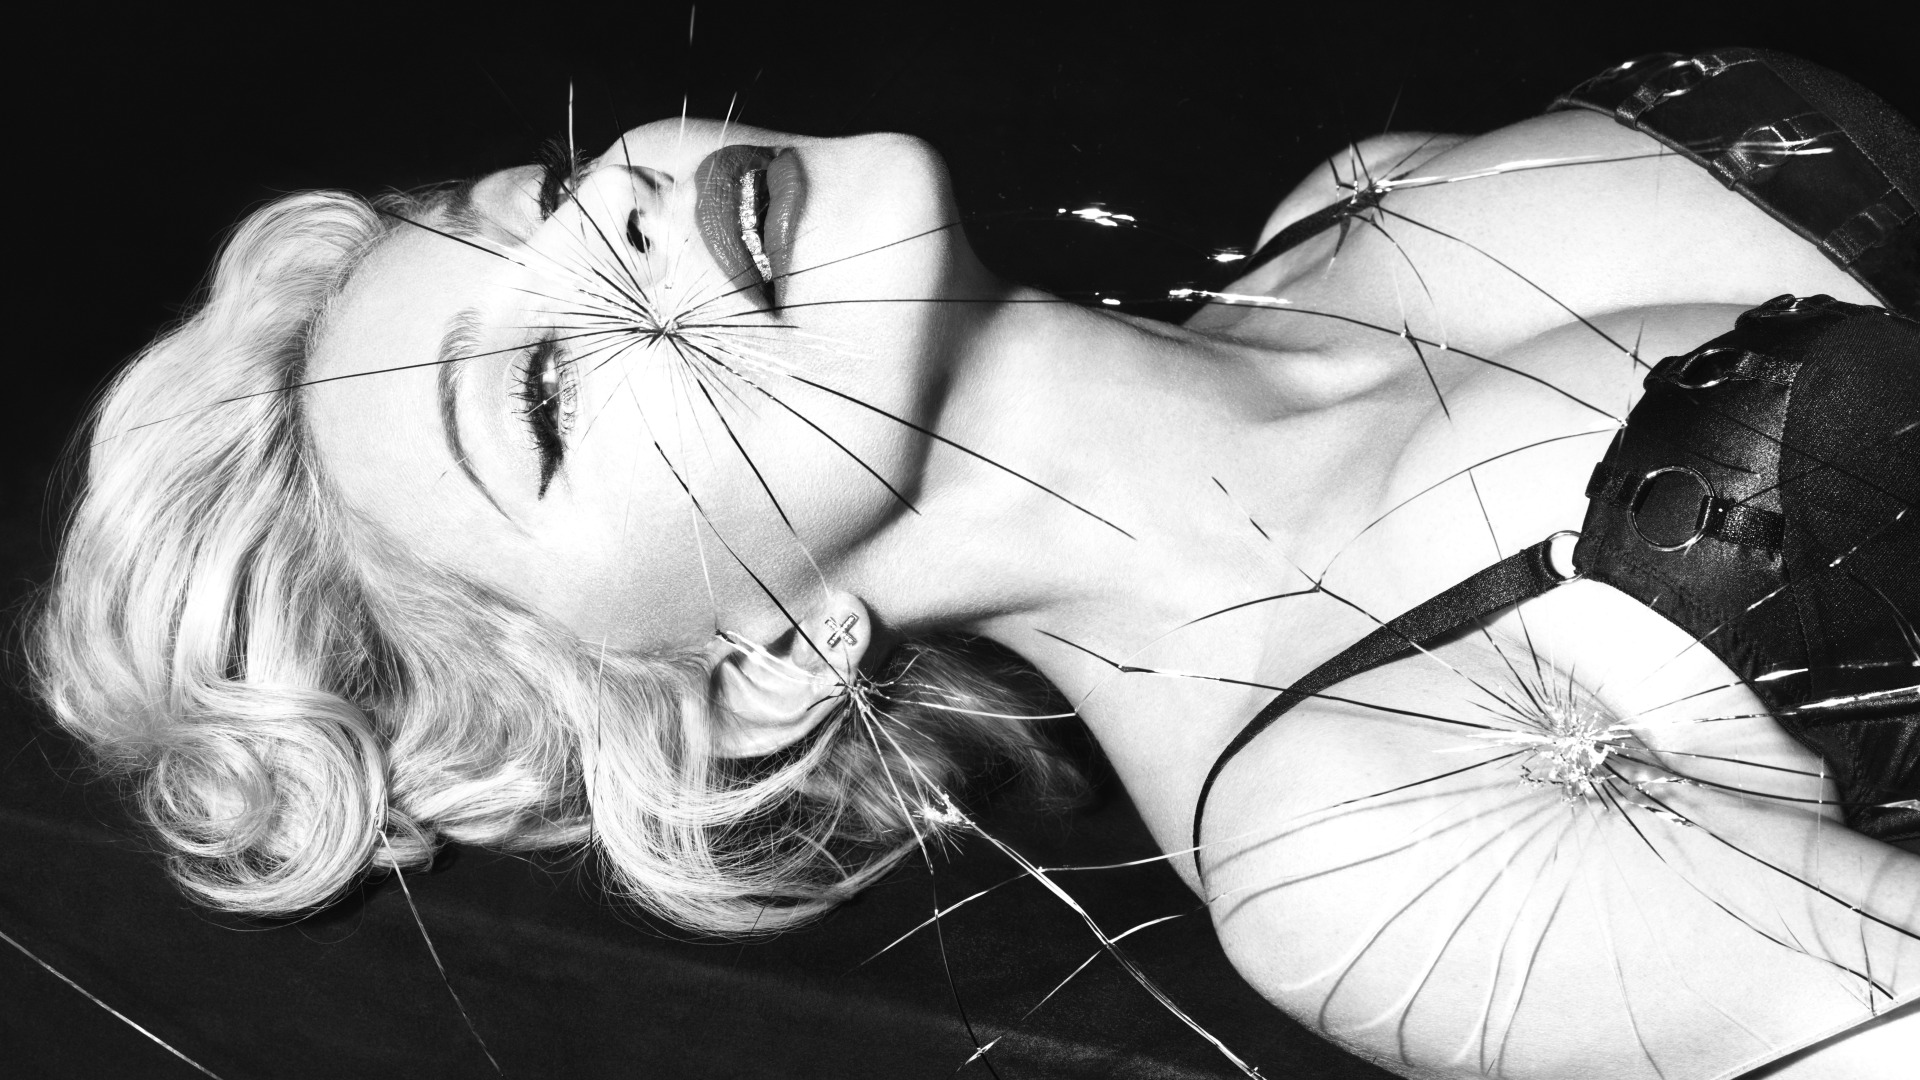 Unapologetic: Navigating Life As An Inspirational Madonna Fan